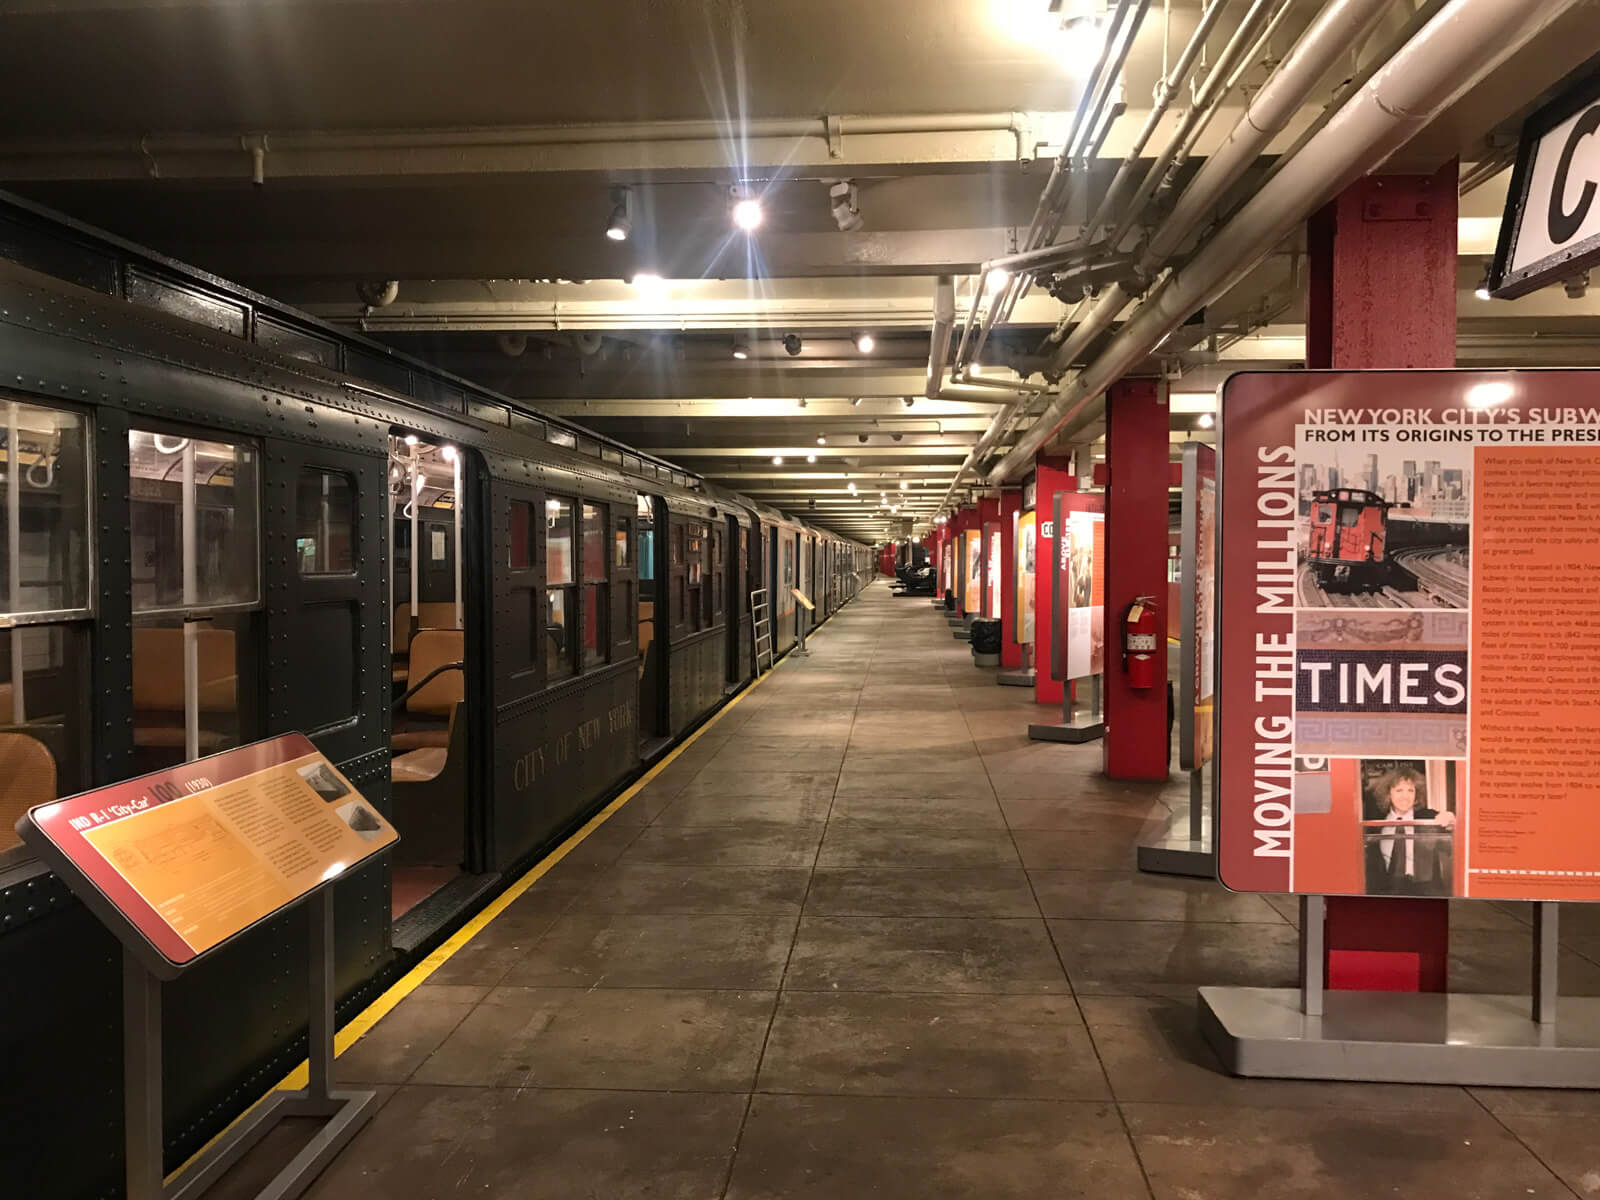 A train station refurbished like a museum. Signs on the platform describe the exhibits, and retired train carriages on the tracks are the features of the exhibit